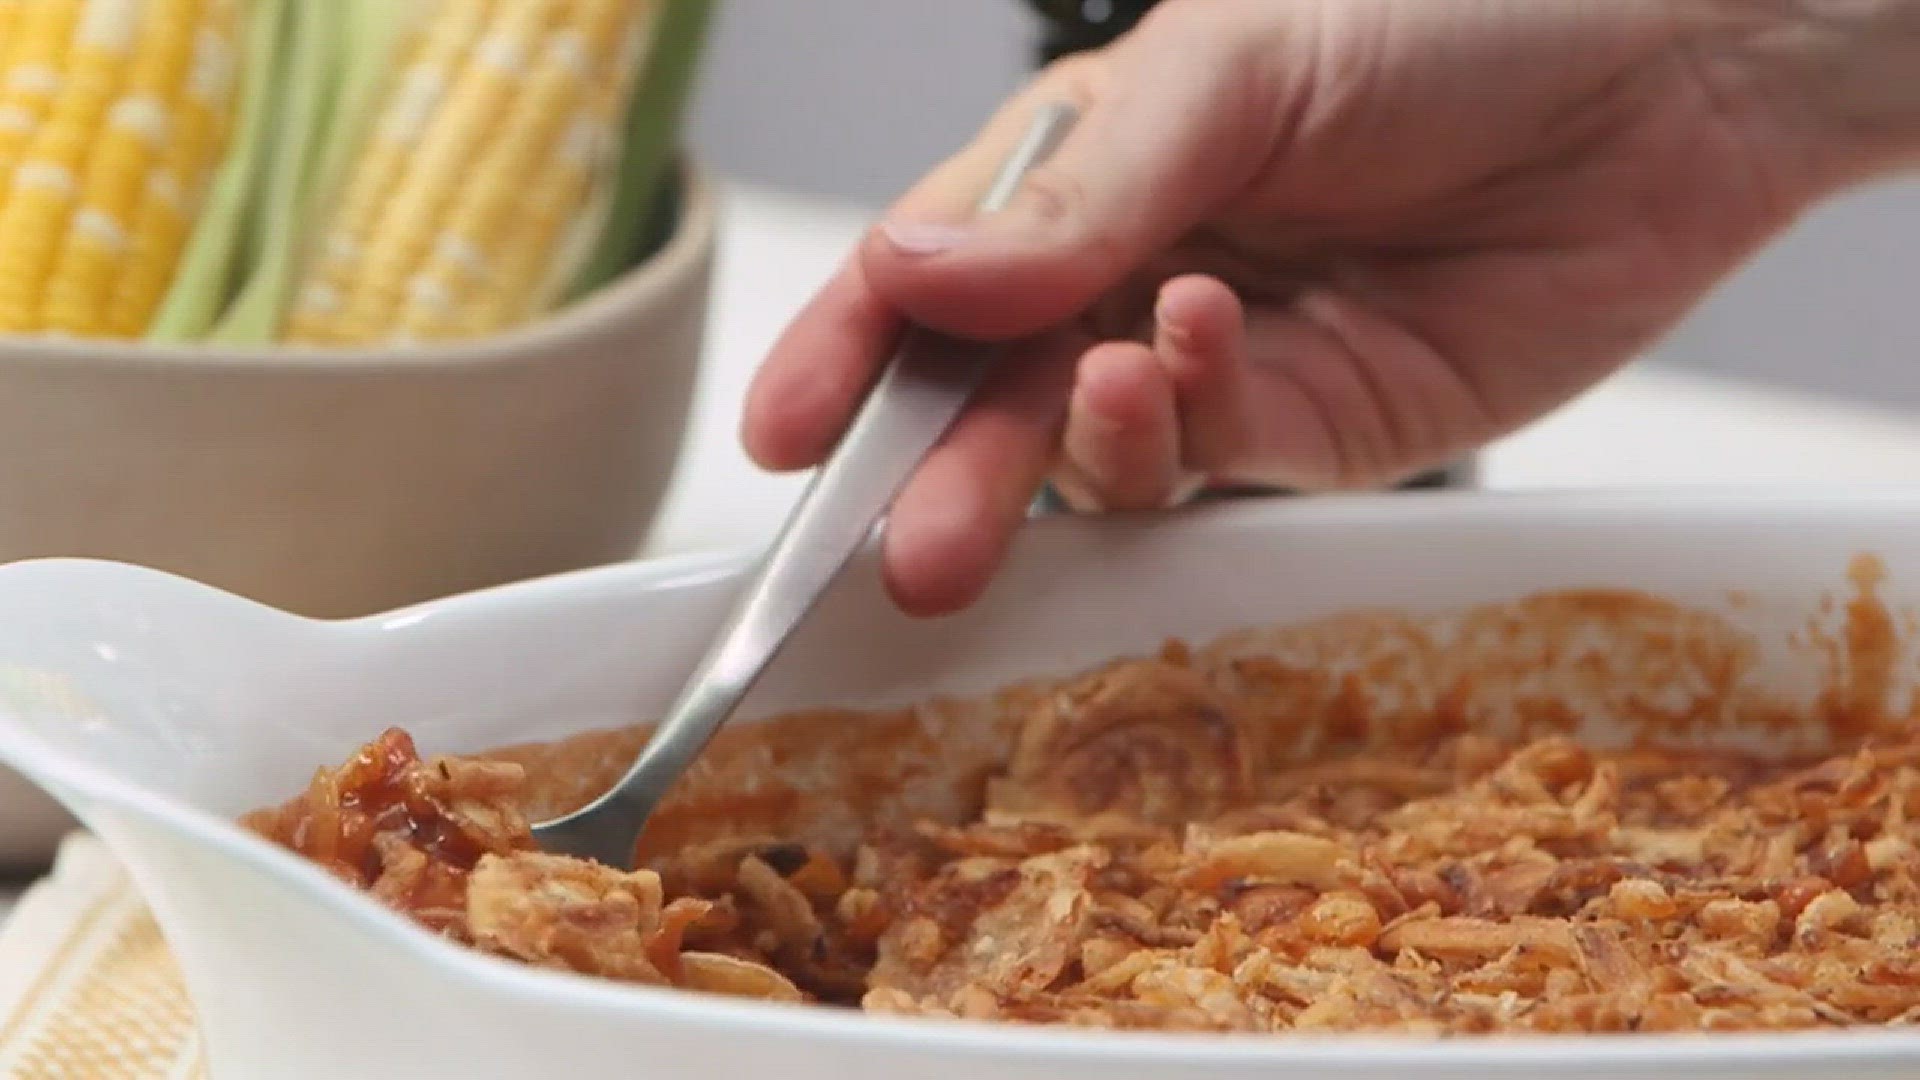 As part of WBIR's Season your Summer Sweepstakes, you can try this recipe for baked beans using Dale's Seasoning